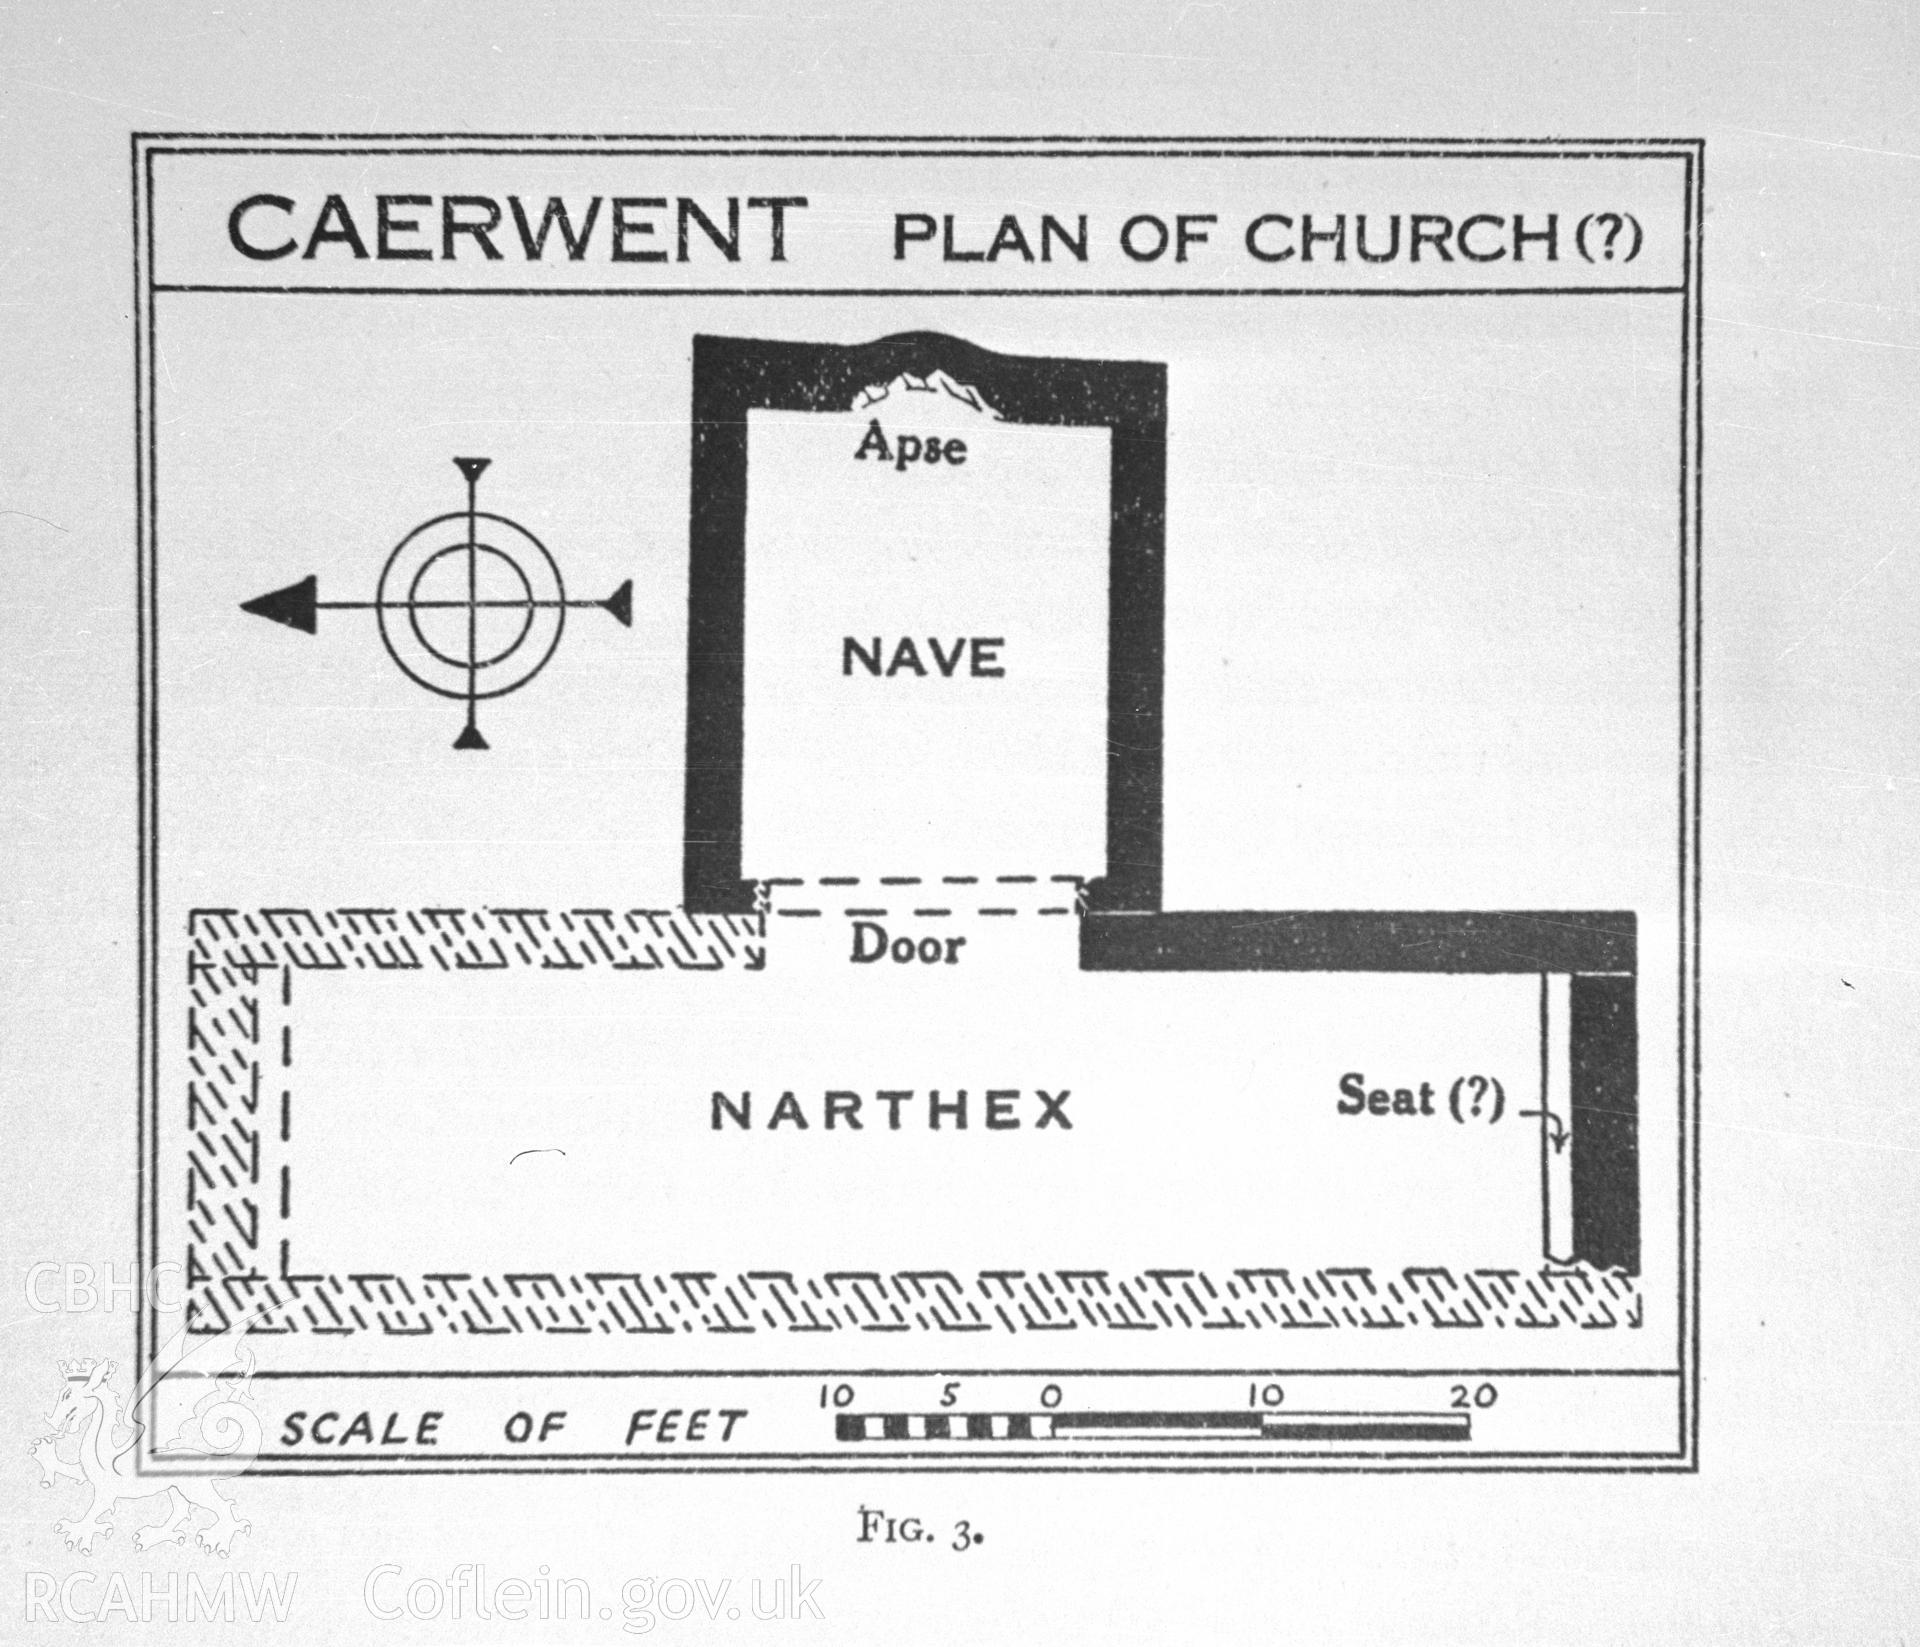 Digital copy of a nitrate negative showing a diagram of St. Stephen's church, Caerwent, taken by Ordnance Survey.